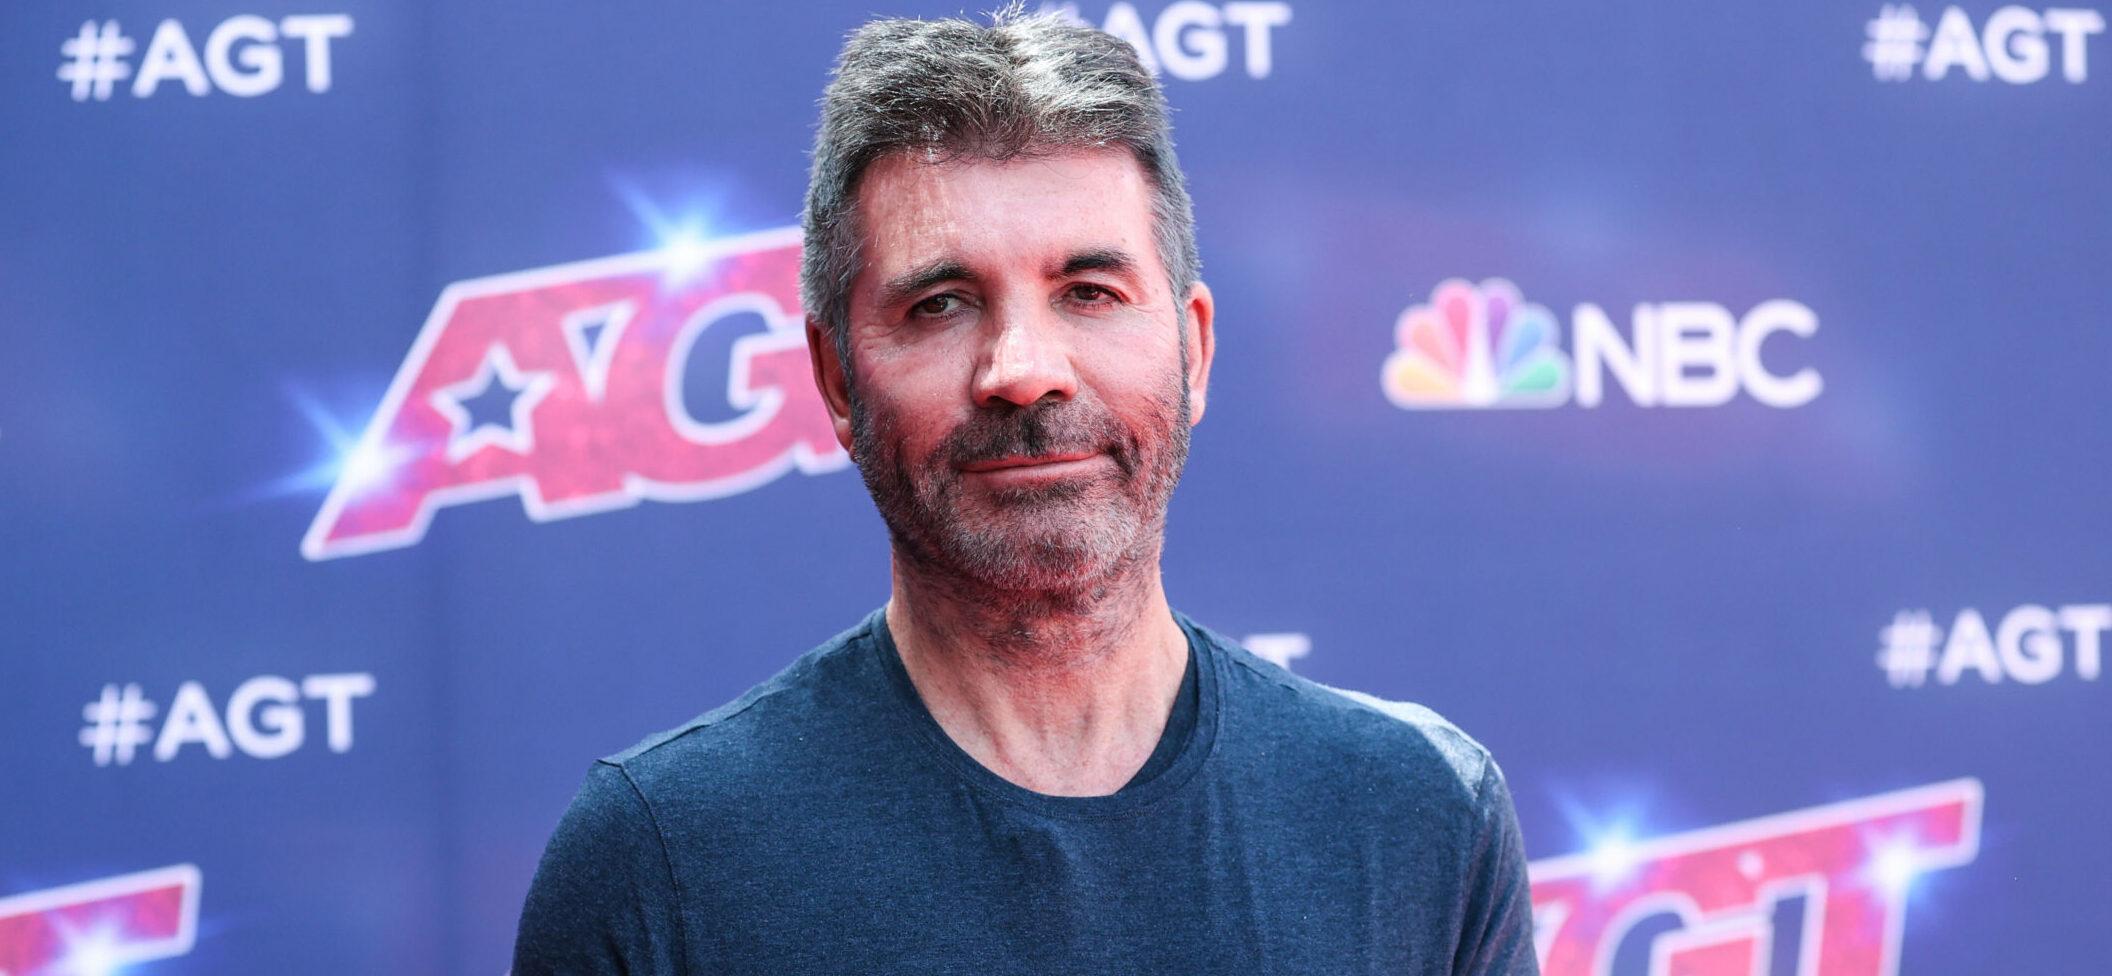 Simon Cowell Reveals Son Eric Is ‘Serious’ About Joining Rock Band: ‘He’s Going To Drum & Sing’